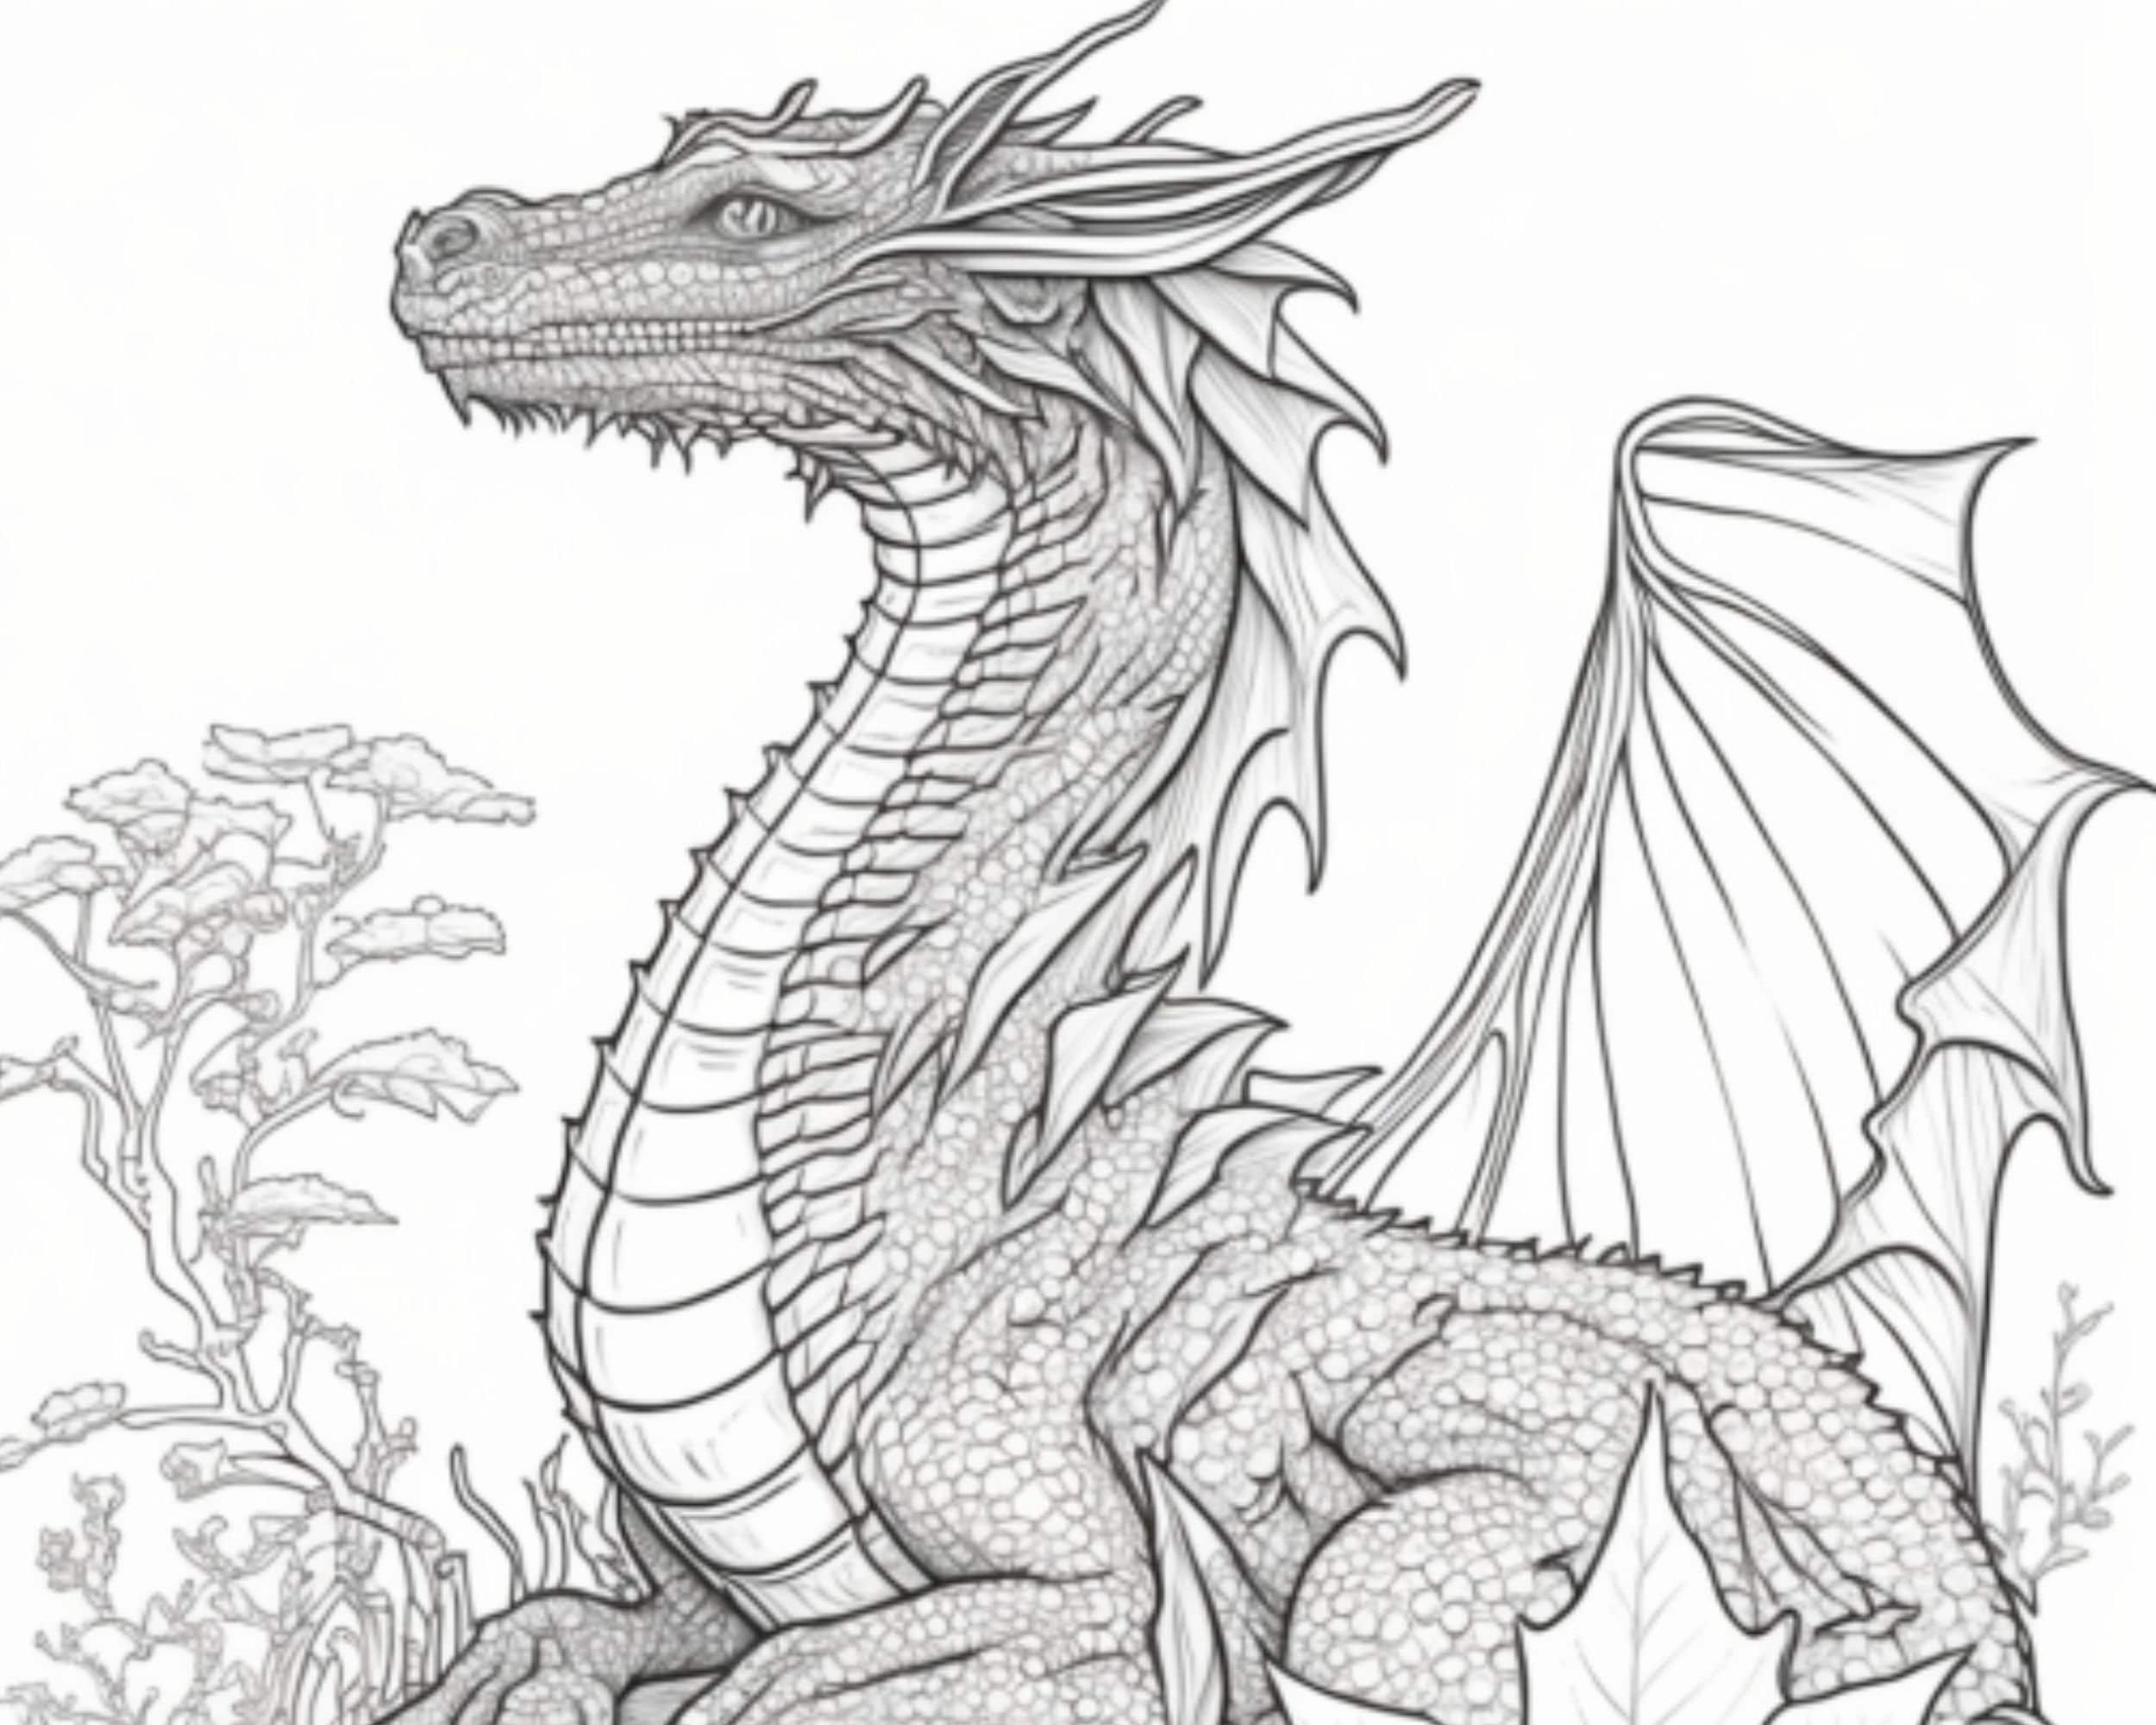 Captivating dragon coloring pages set of printable black white pdf illustrations for adults and kids